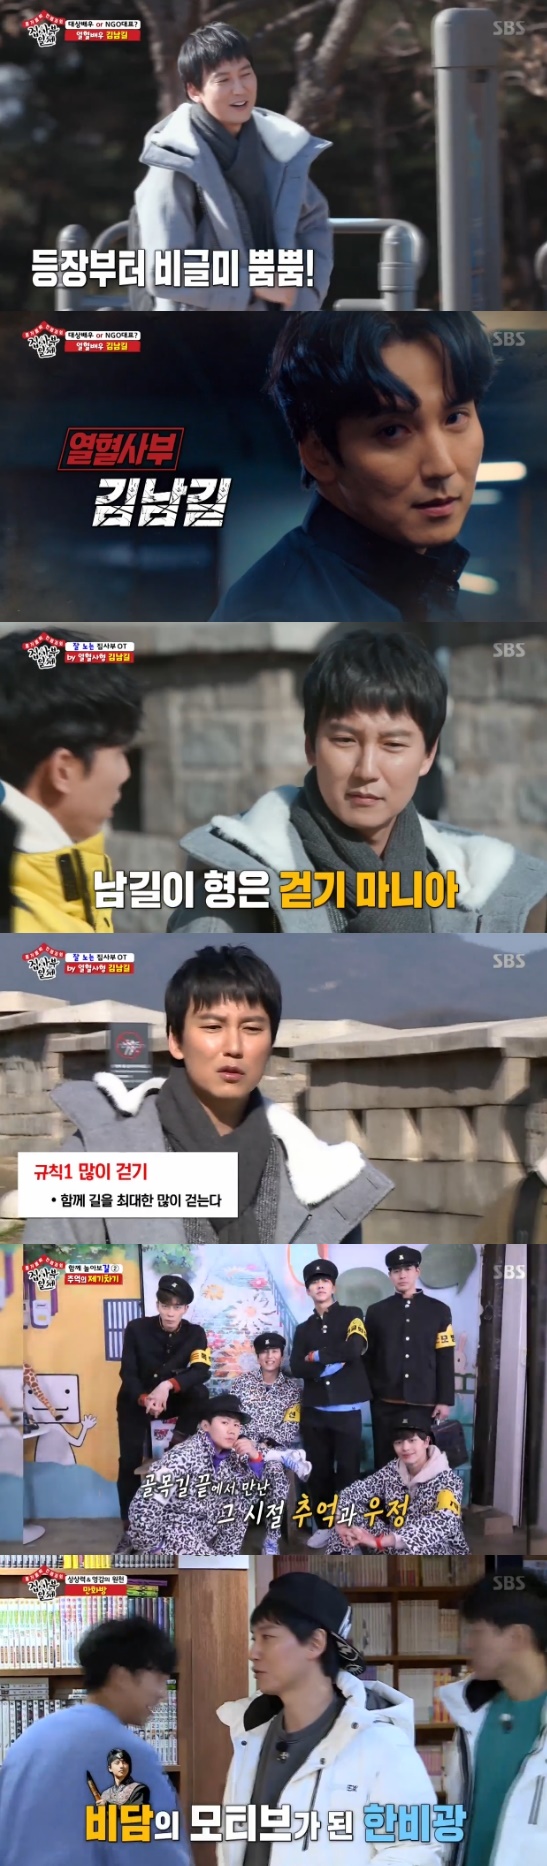 All The Butlers master Kim Nam-gil breathed together with the members through walking.On SBS All The Butlers broadcast on the 9th, it said that it will donate to students who need school supplies by adding the number of steps of members.On this day, Jeon Do-yeon, a Hint Fairy, said that he had worked with the Master.Kim Nam-gil handed out home correspondence to members, saying he had prepared the New Years OT. There were rules to keep in the OT.When Lee Seung-gi asked, Do you walk under the influence of Ha Jung-woo? Kim Nam-gil said, I liked to walk originally and walked alone.Then Jung Woo-hyun said, I entered the walking school because I asked if I would walk together.Kim Nam-gil asked, How much do you walk in walking school? Walking school is anti-force, so if you walk at least a day, you pay a fine.I pay a fine depending on the number of steps. Kim Nam-gil praised walking, saying that walking is good for health, can empty your head, and is good for ideas.Shin Sung-rok empathised furiously, and Kim Nam-gil embraced Shin Sung-rok; the two embraced him more than four times in the first day and laughed.Kim Nam-gil also said, We are running a culture and arts NGO Gil Story. I misunderstand that it is a good person because it is a civic group.The second rule is not to use cell phones. Members submitted cell phones. The third rule is to decide anything together.But Kim Nam-gil added, I talk like this and I do it at my disposal.Kim Nam-gil and the members, who went on the road, found a breakout while walking on the road: members who decided to share hot dogs with scissors and rocks.Last-placed Kim Nam-gil laughed as he couldnt eat a single piece.Next, a matchup was held for a hodok. Shin Sung-rok, who saw the members skills, said, Why are they so good?I did not play at the kids cafe when I was a child, he laughed. The winner was Lee Seung-gi.When the members said it was fun, Kim Nam-gil said, This is endless. I will show you what to play.The members borrowed memories of school uniforms and decided to raise them. When Yang Se-hyeong asked, What do you realize through this? Kim Nam-gil said, I have to have fun unconditionally.I can do my job well if I have fun and rest. The match-up resulted in a win by the team (Kim Nam-gil, Lee Seung-gi, and Lee Sang-yoon). The penalty was just night.Kim Nam-gil then led the members to the comic book room; Kim Nam-gil said he was inspired by comedy programs and comic books.Kim Nam-gil said, I chose the motif of Hanbi Kwang of King of the Sundeok during the drama King of the Sundeok.The members who had to settle the meal in the allowance met their heads, and the members laughed when they asked for more allowance.Photo = SBS Broadcasting Screen